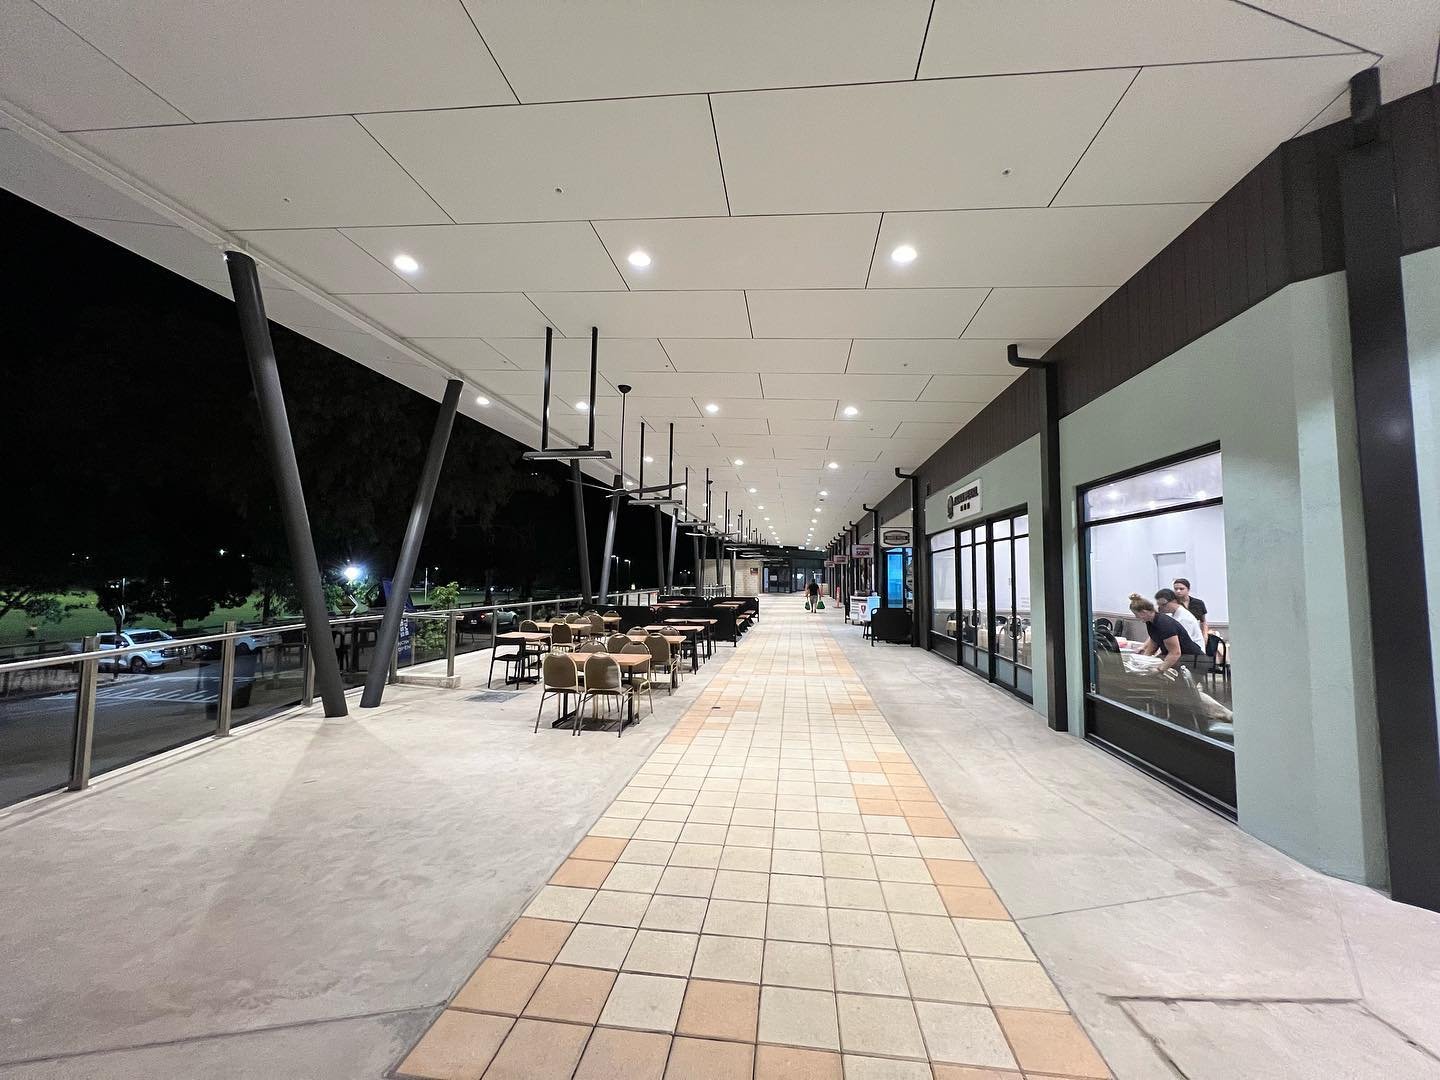 The terrace dining area in the evening at Home Co Glenmore Park is something special 🤩
&bull;
&bull;
&bull;
#hallmacelectrical #electricalcontractor #electricalprojects #sparky #skilledtrade #power #construction #electricalapprentice #electriciansli